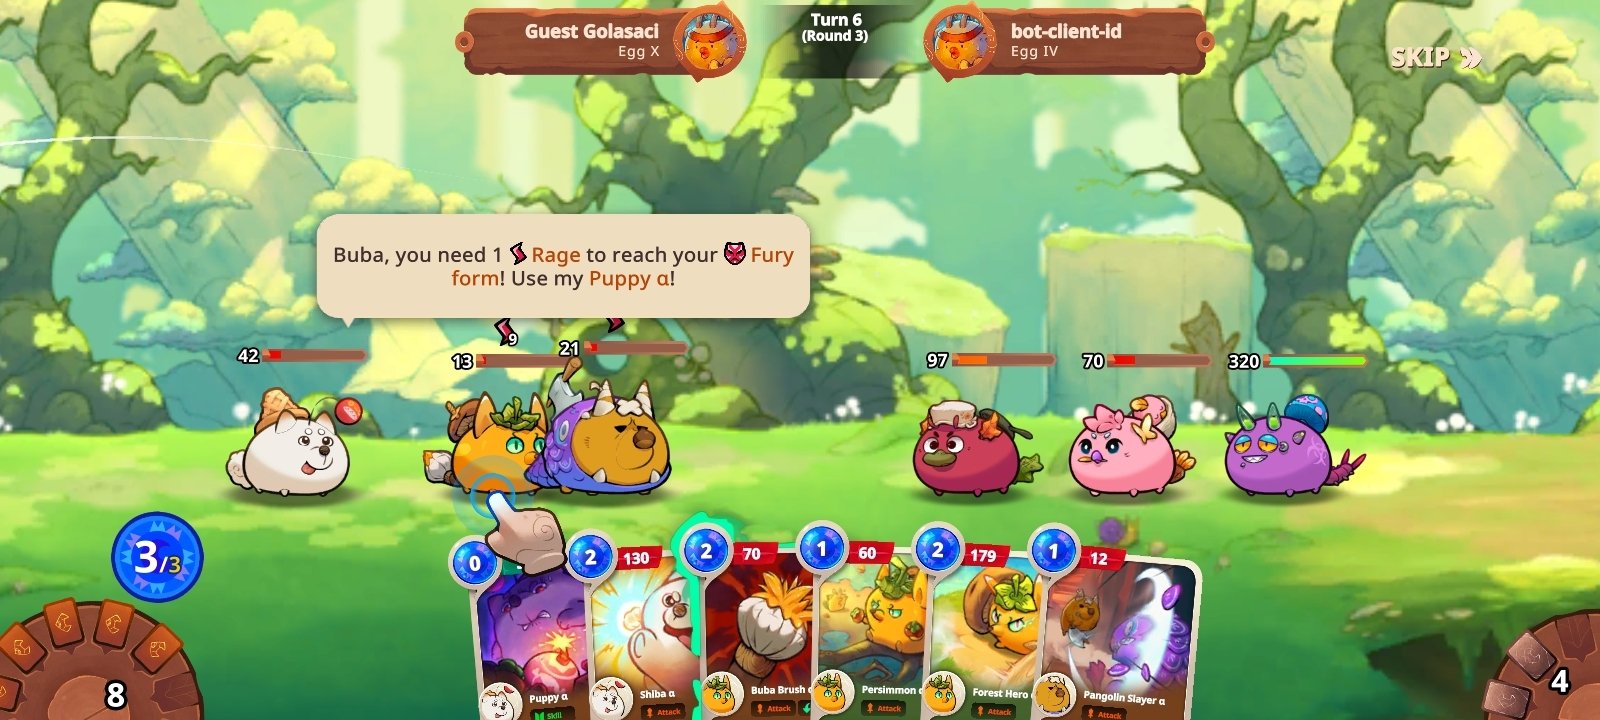 Axie Infinity 1 0 0 Download For Android Apk Free